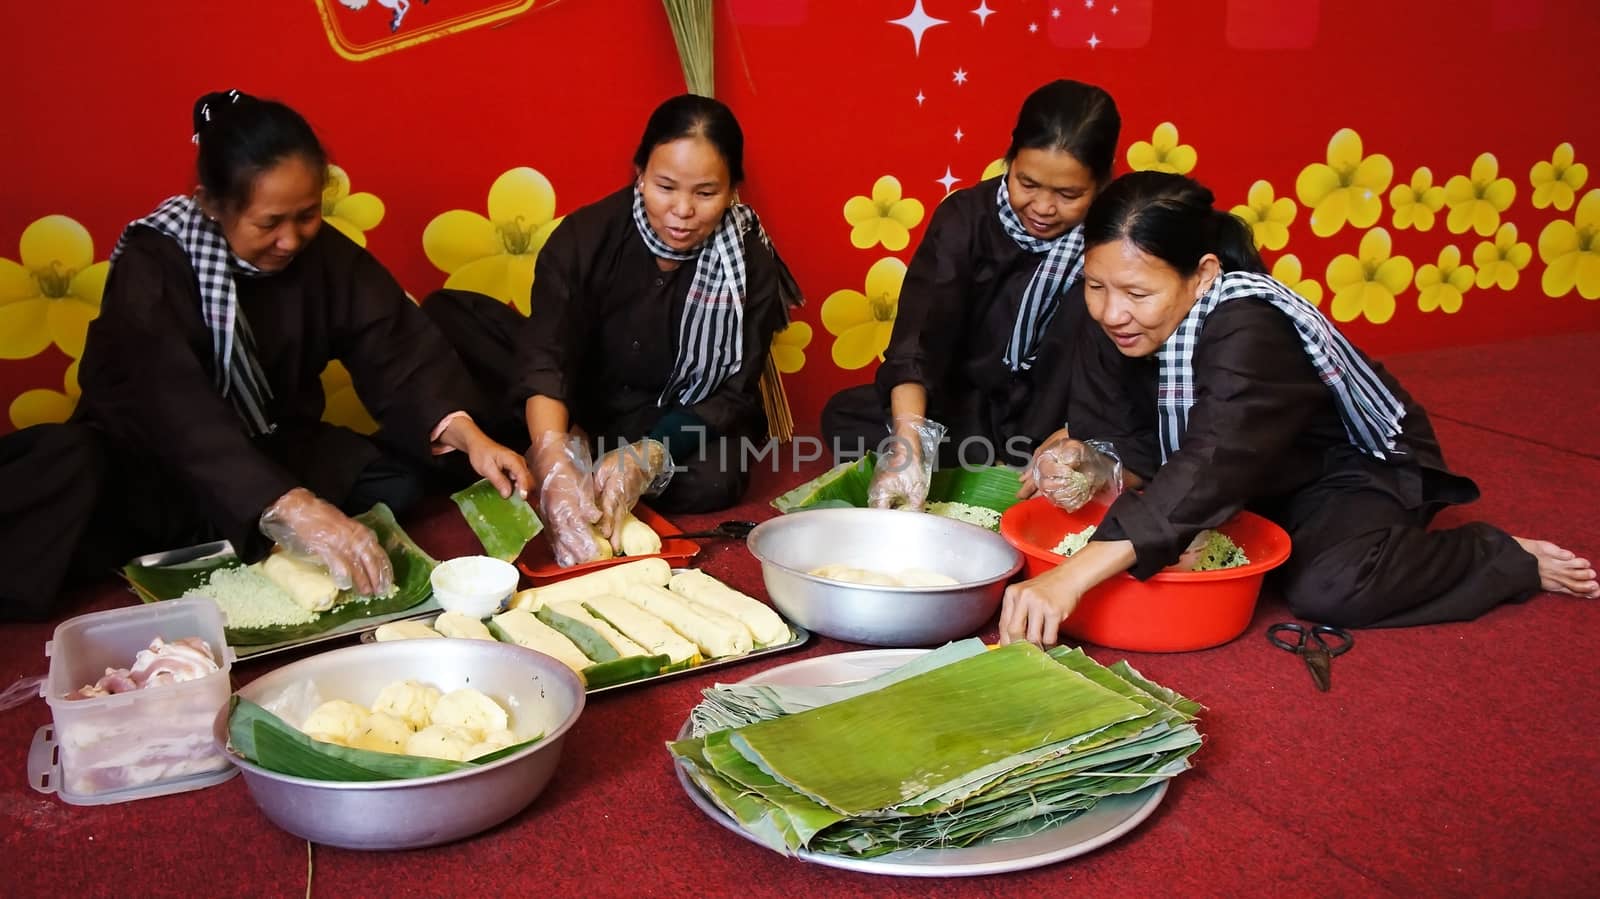 Group of people making traditional Vietnam food for Tet by xuanhuongho